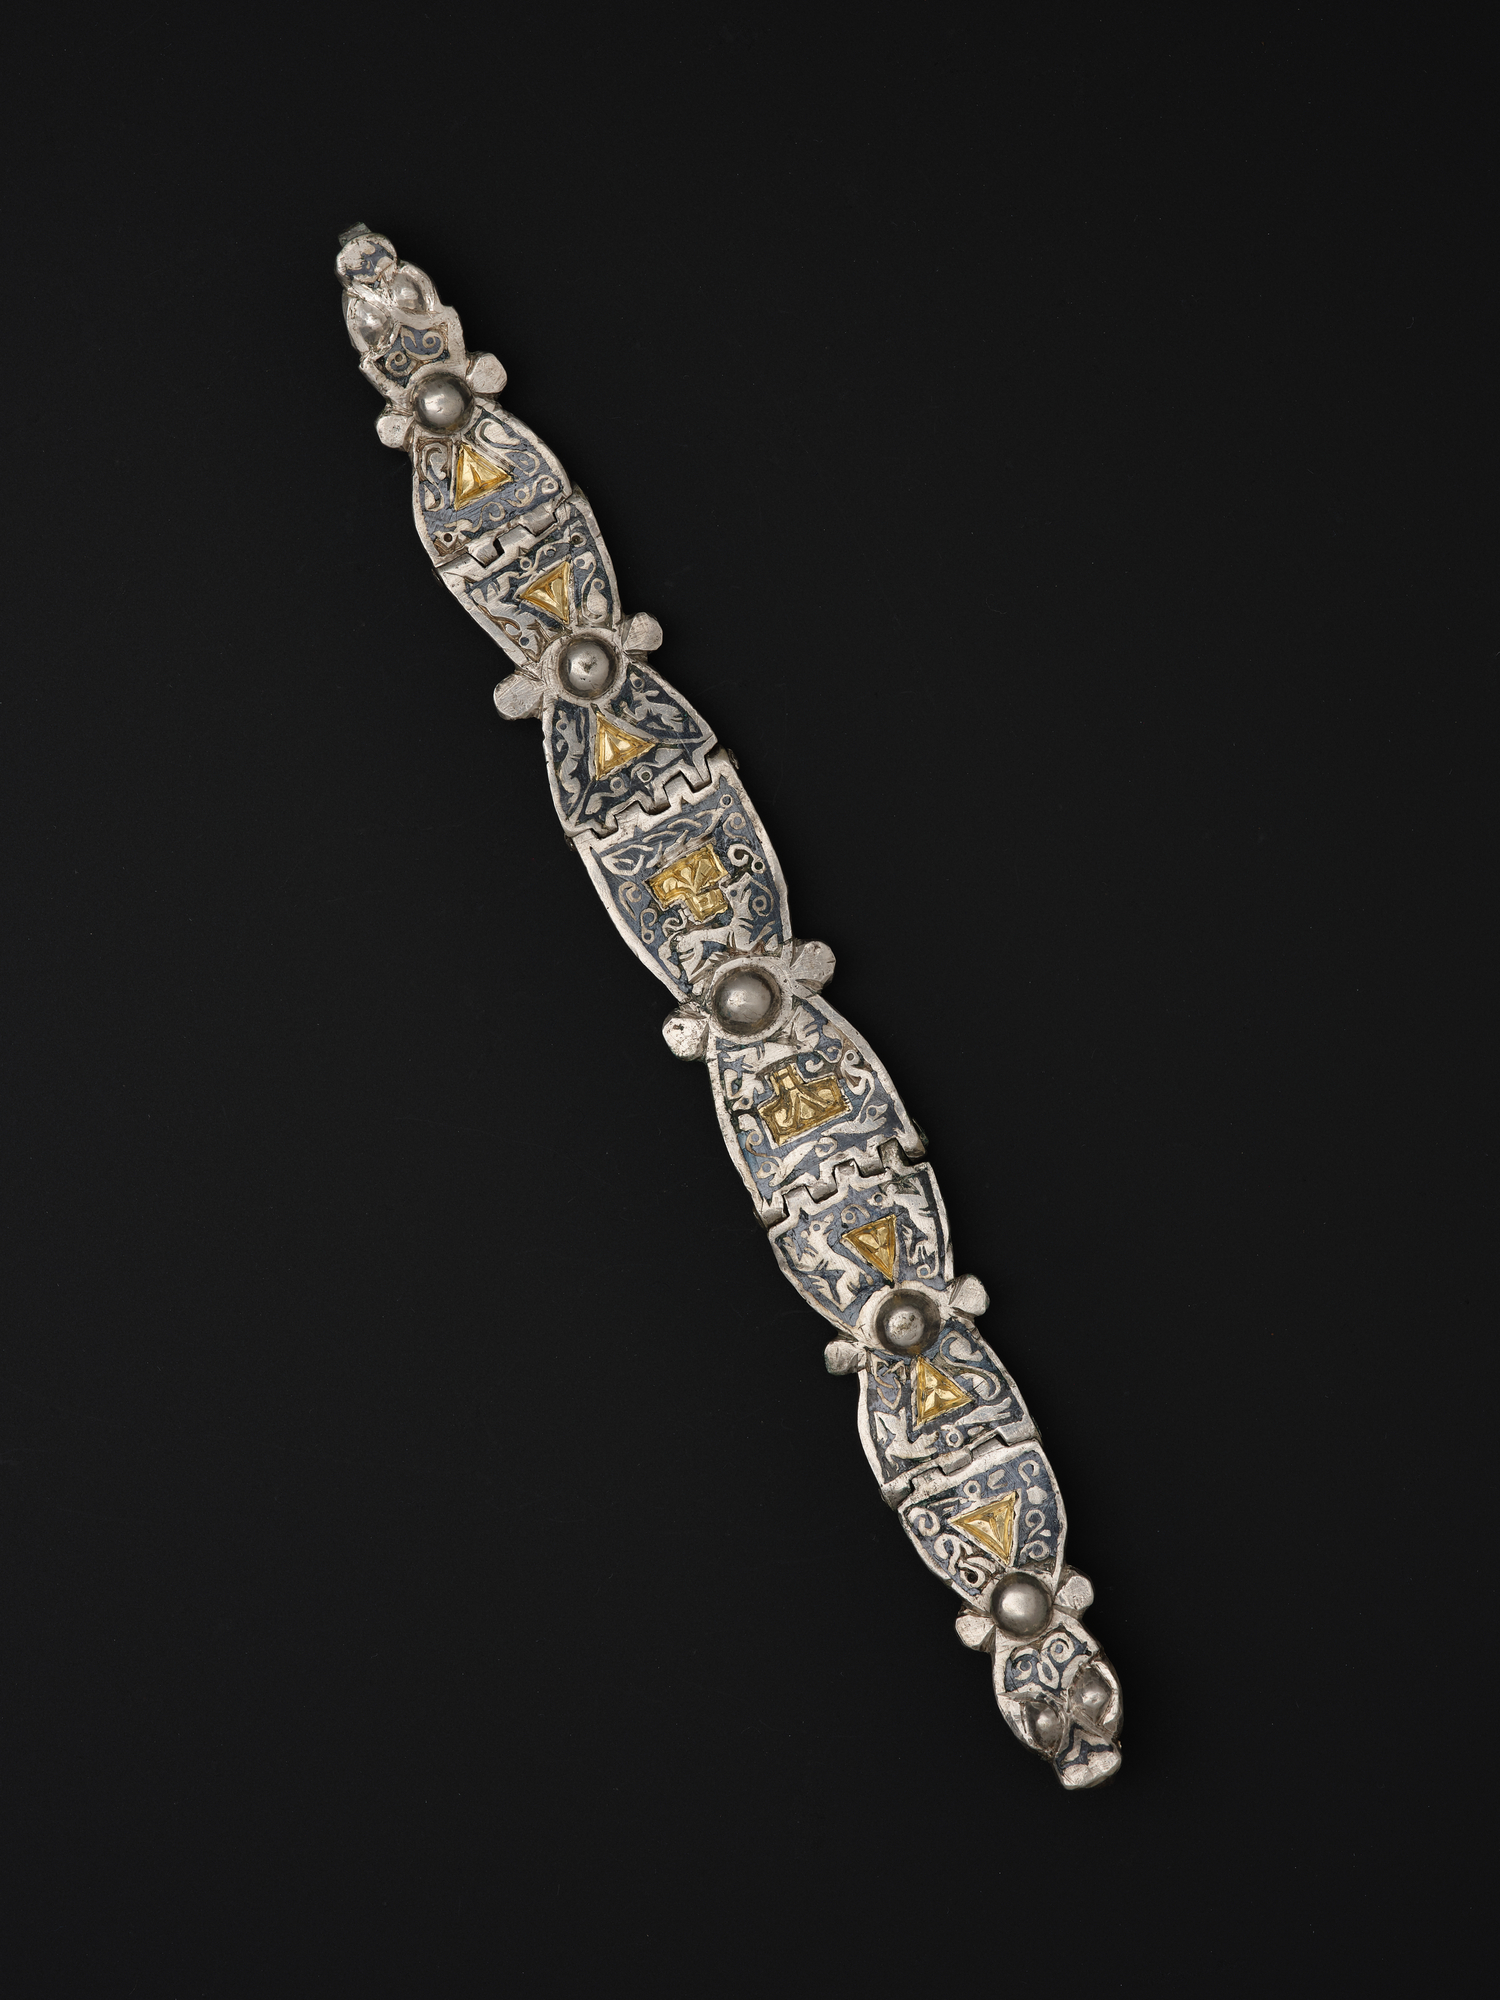 Image of Braid, from the Viking age Galloway Hoard © National Museums Scotland